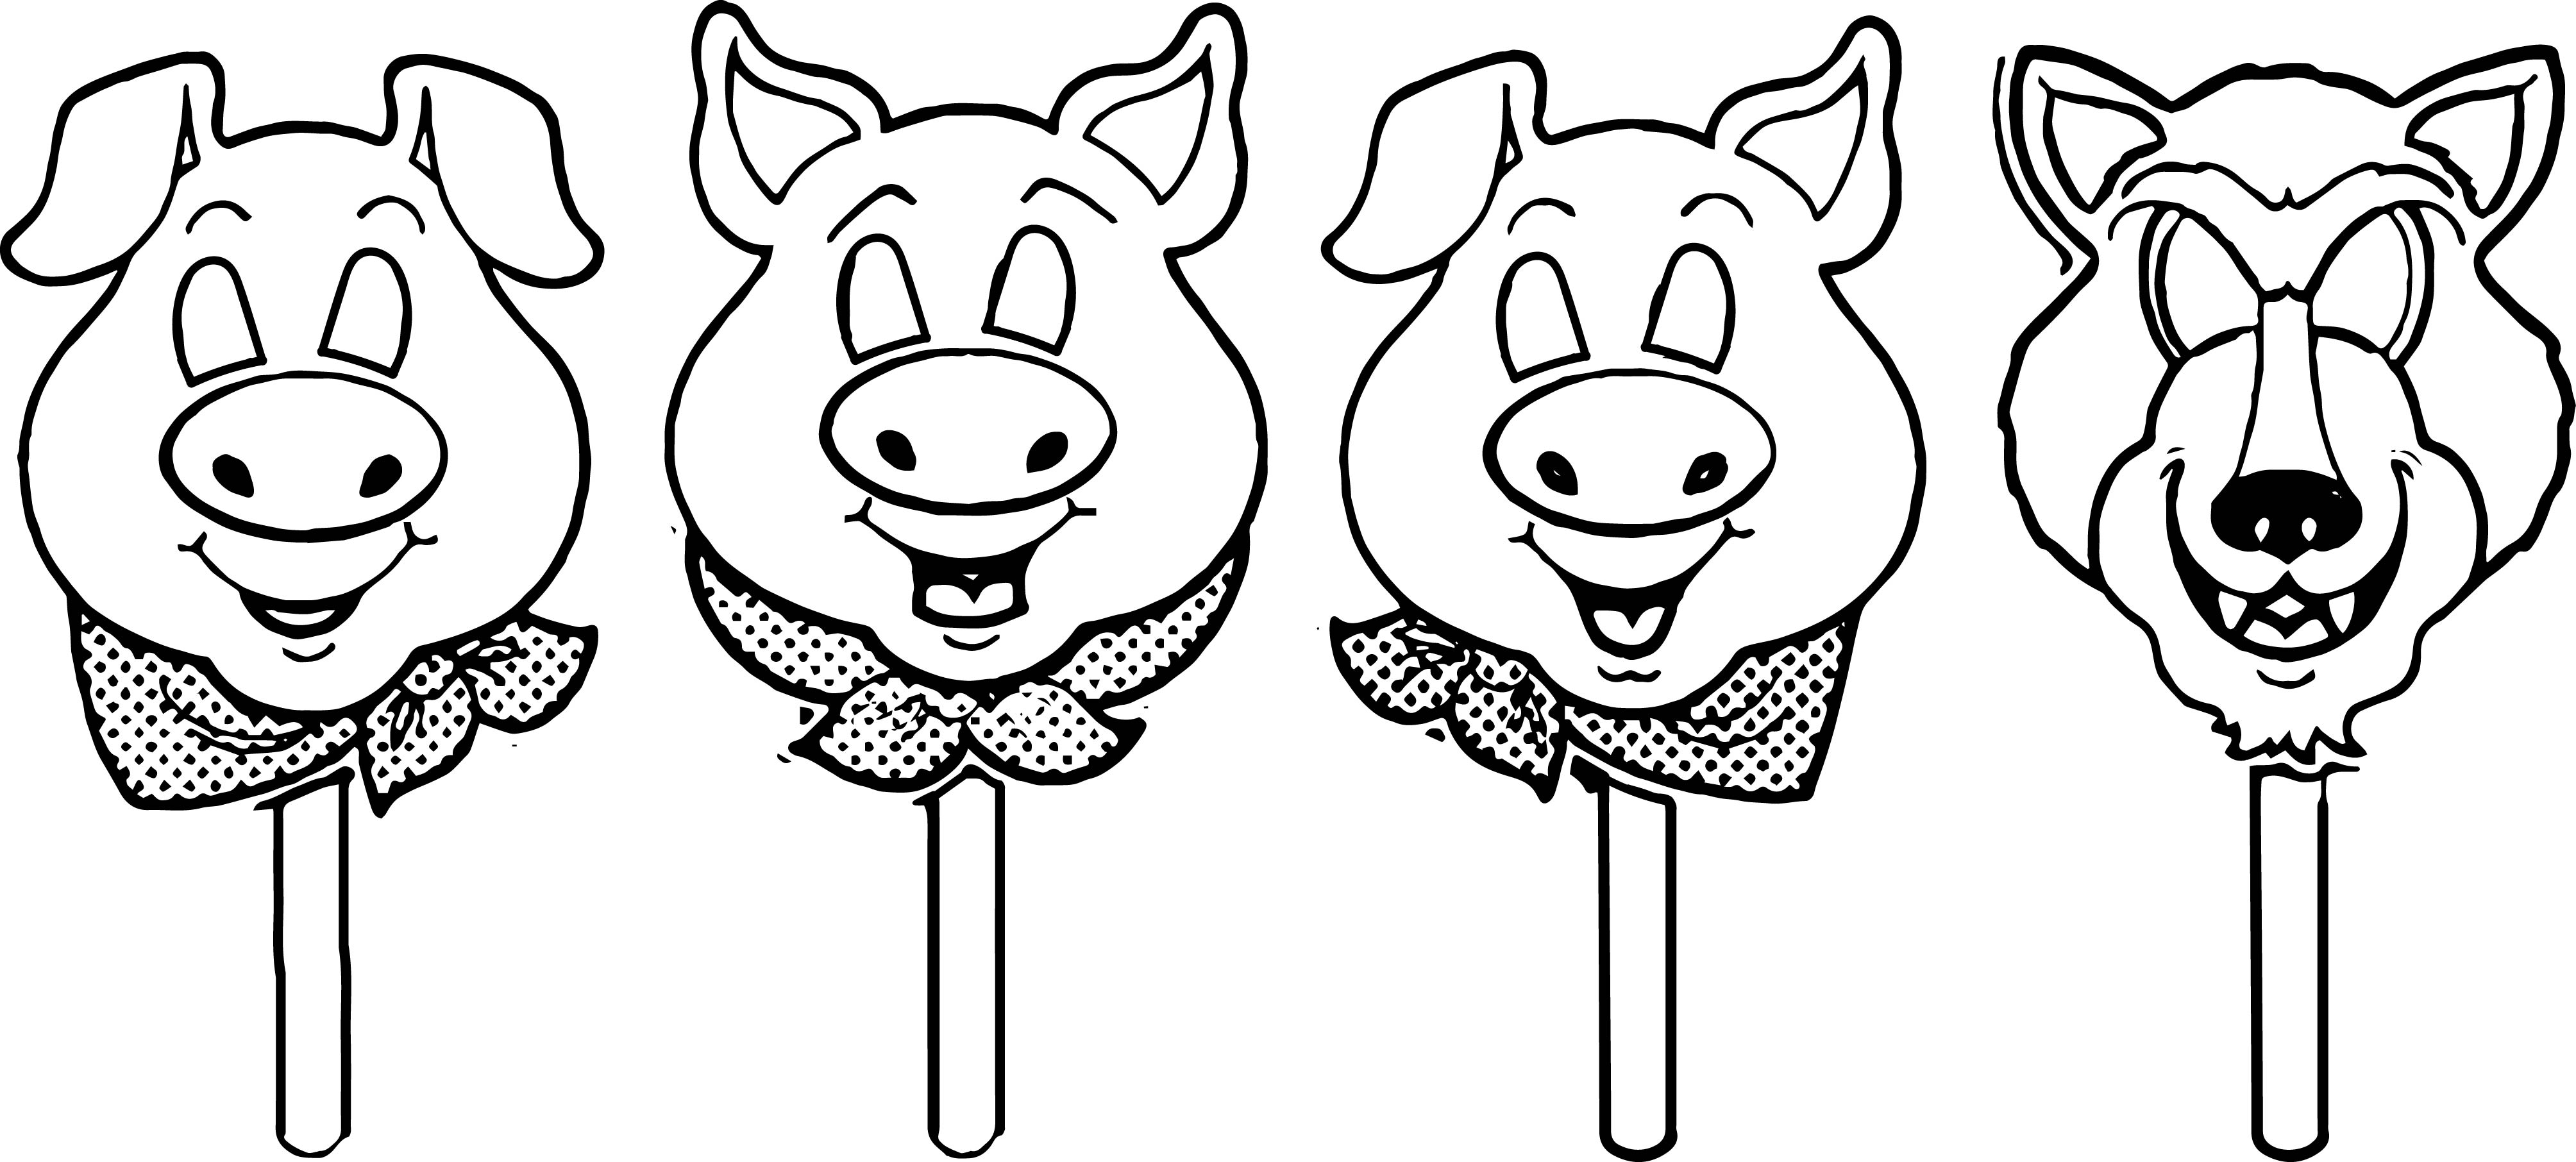 1669 Pigs free clipart.